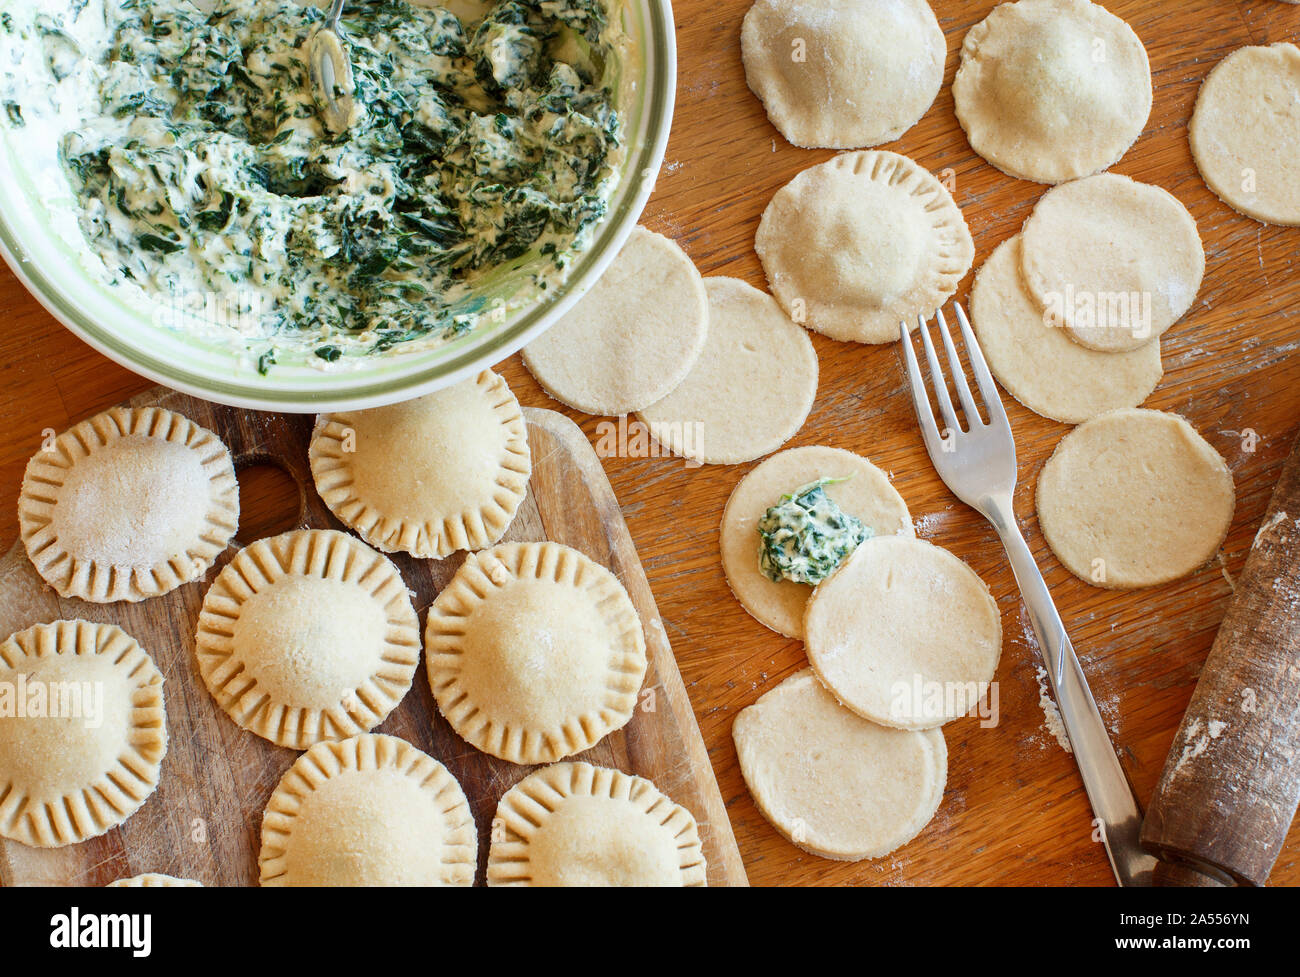 Making ravioli with ricotta cheese and spinach on a wooden board Stock Photo